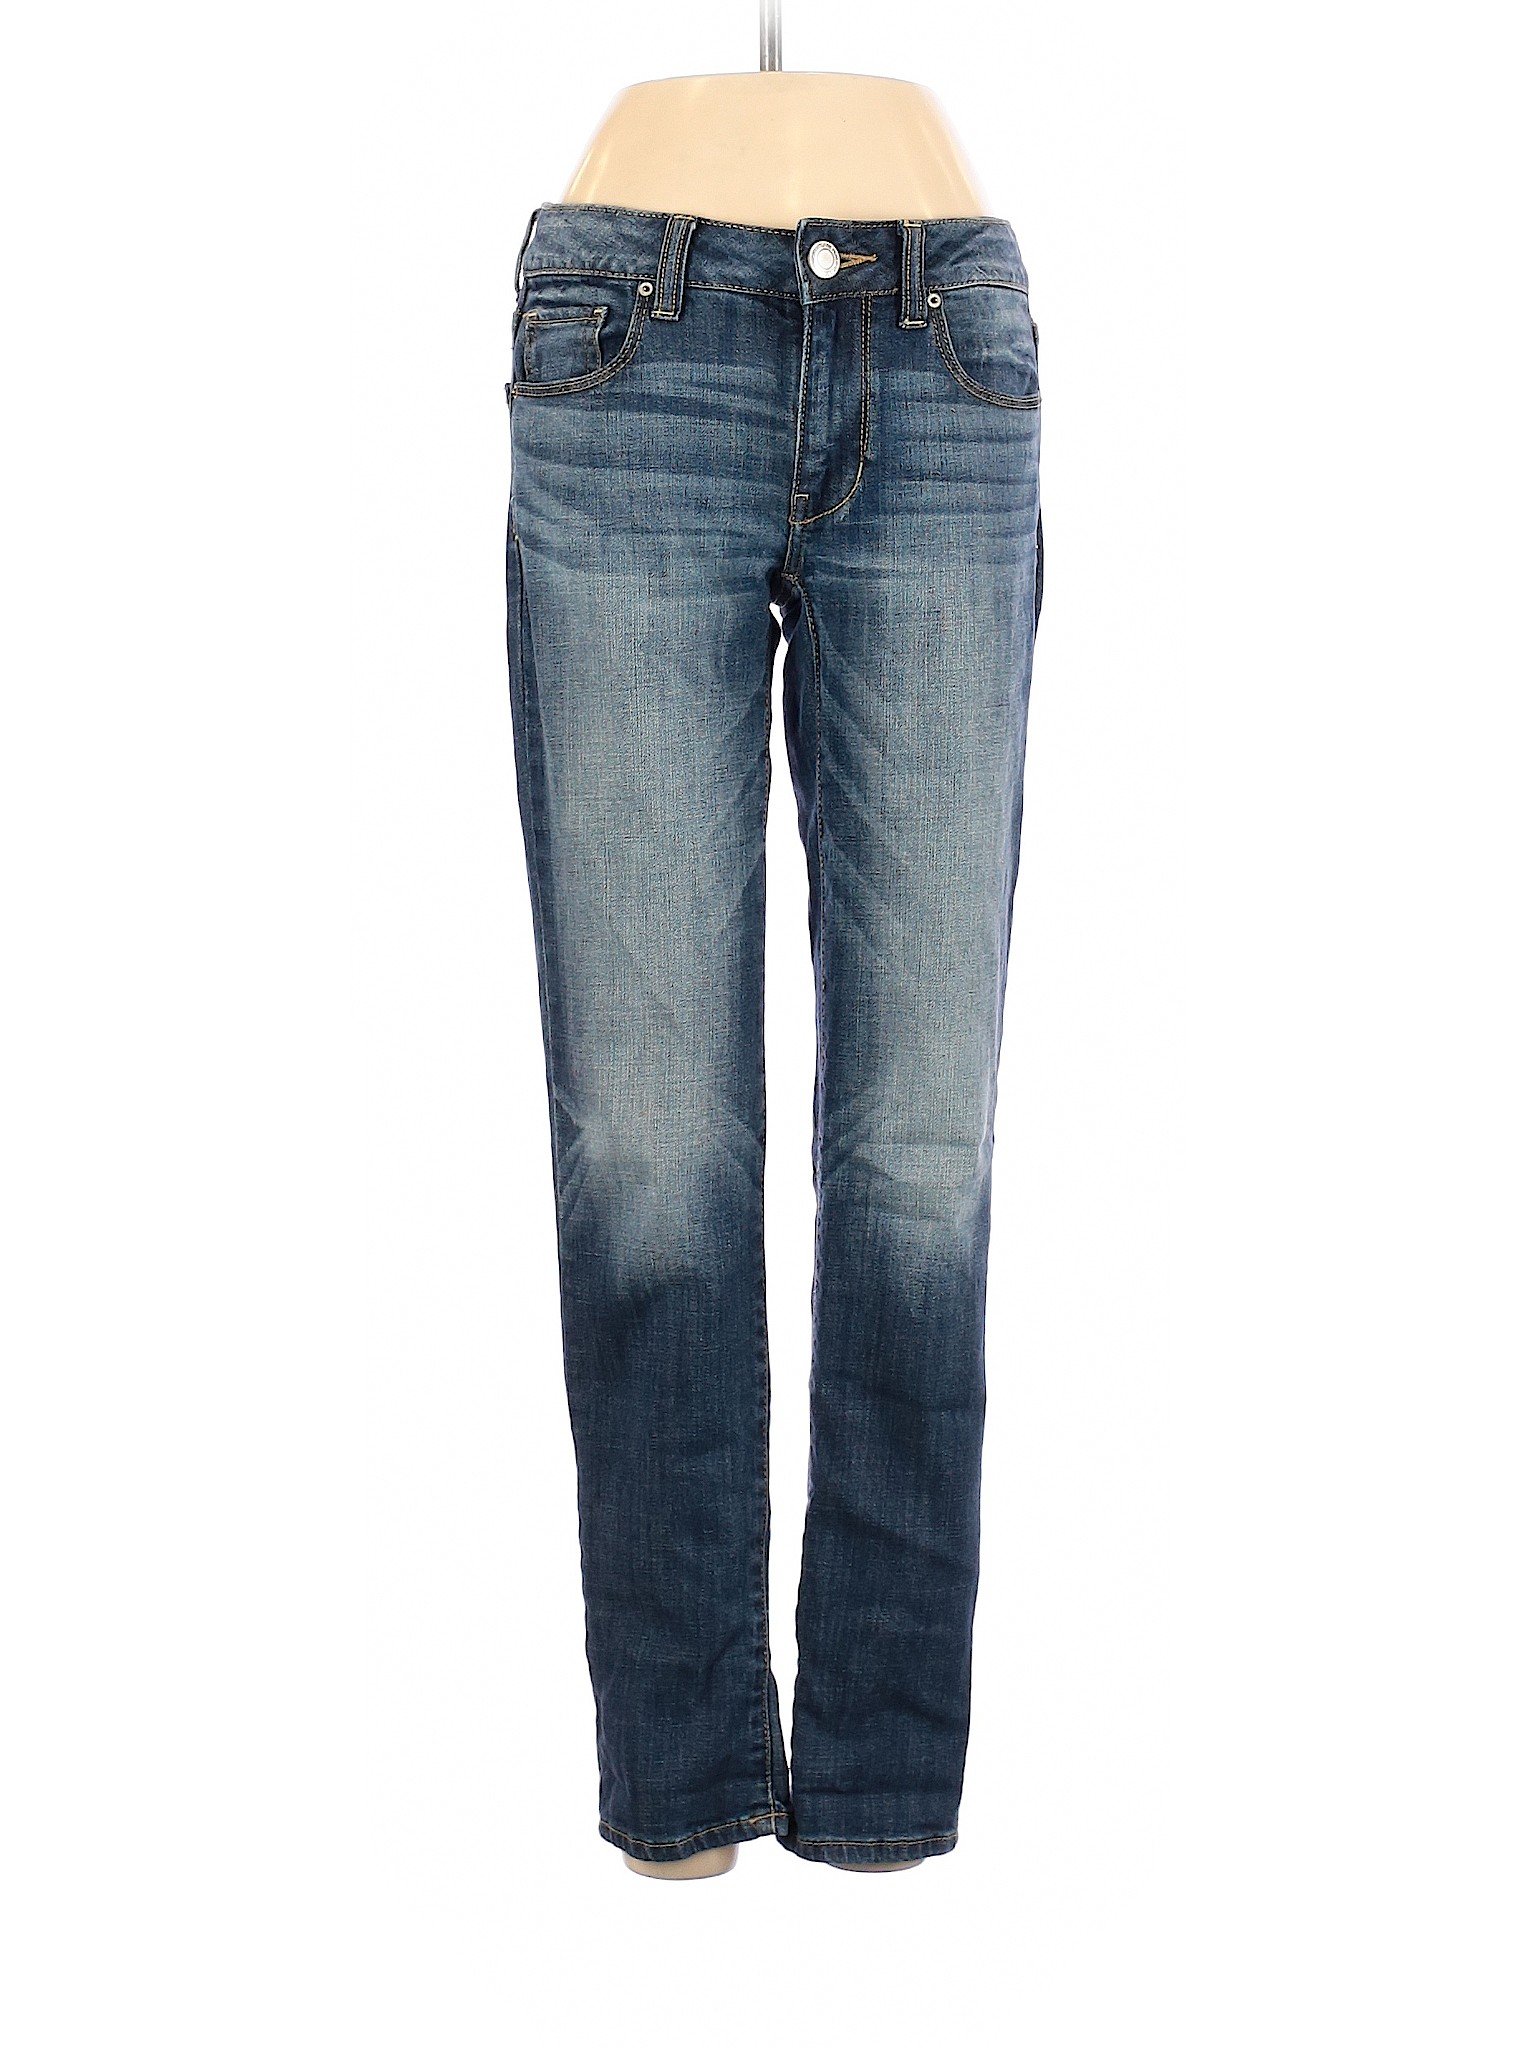 American Eagle Outfitters Women Blue Jeans 00 | eBay